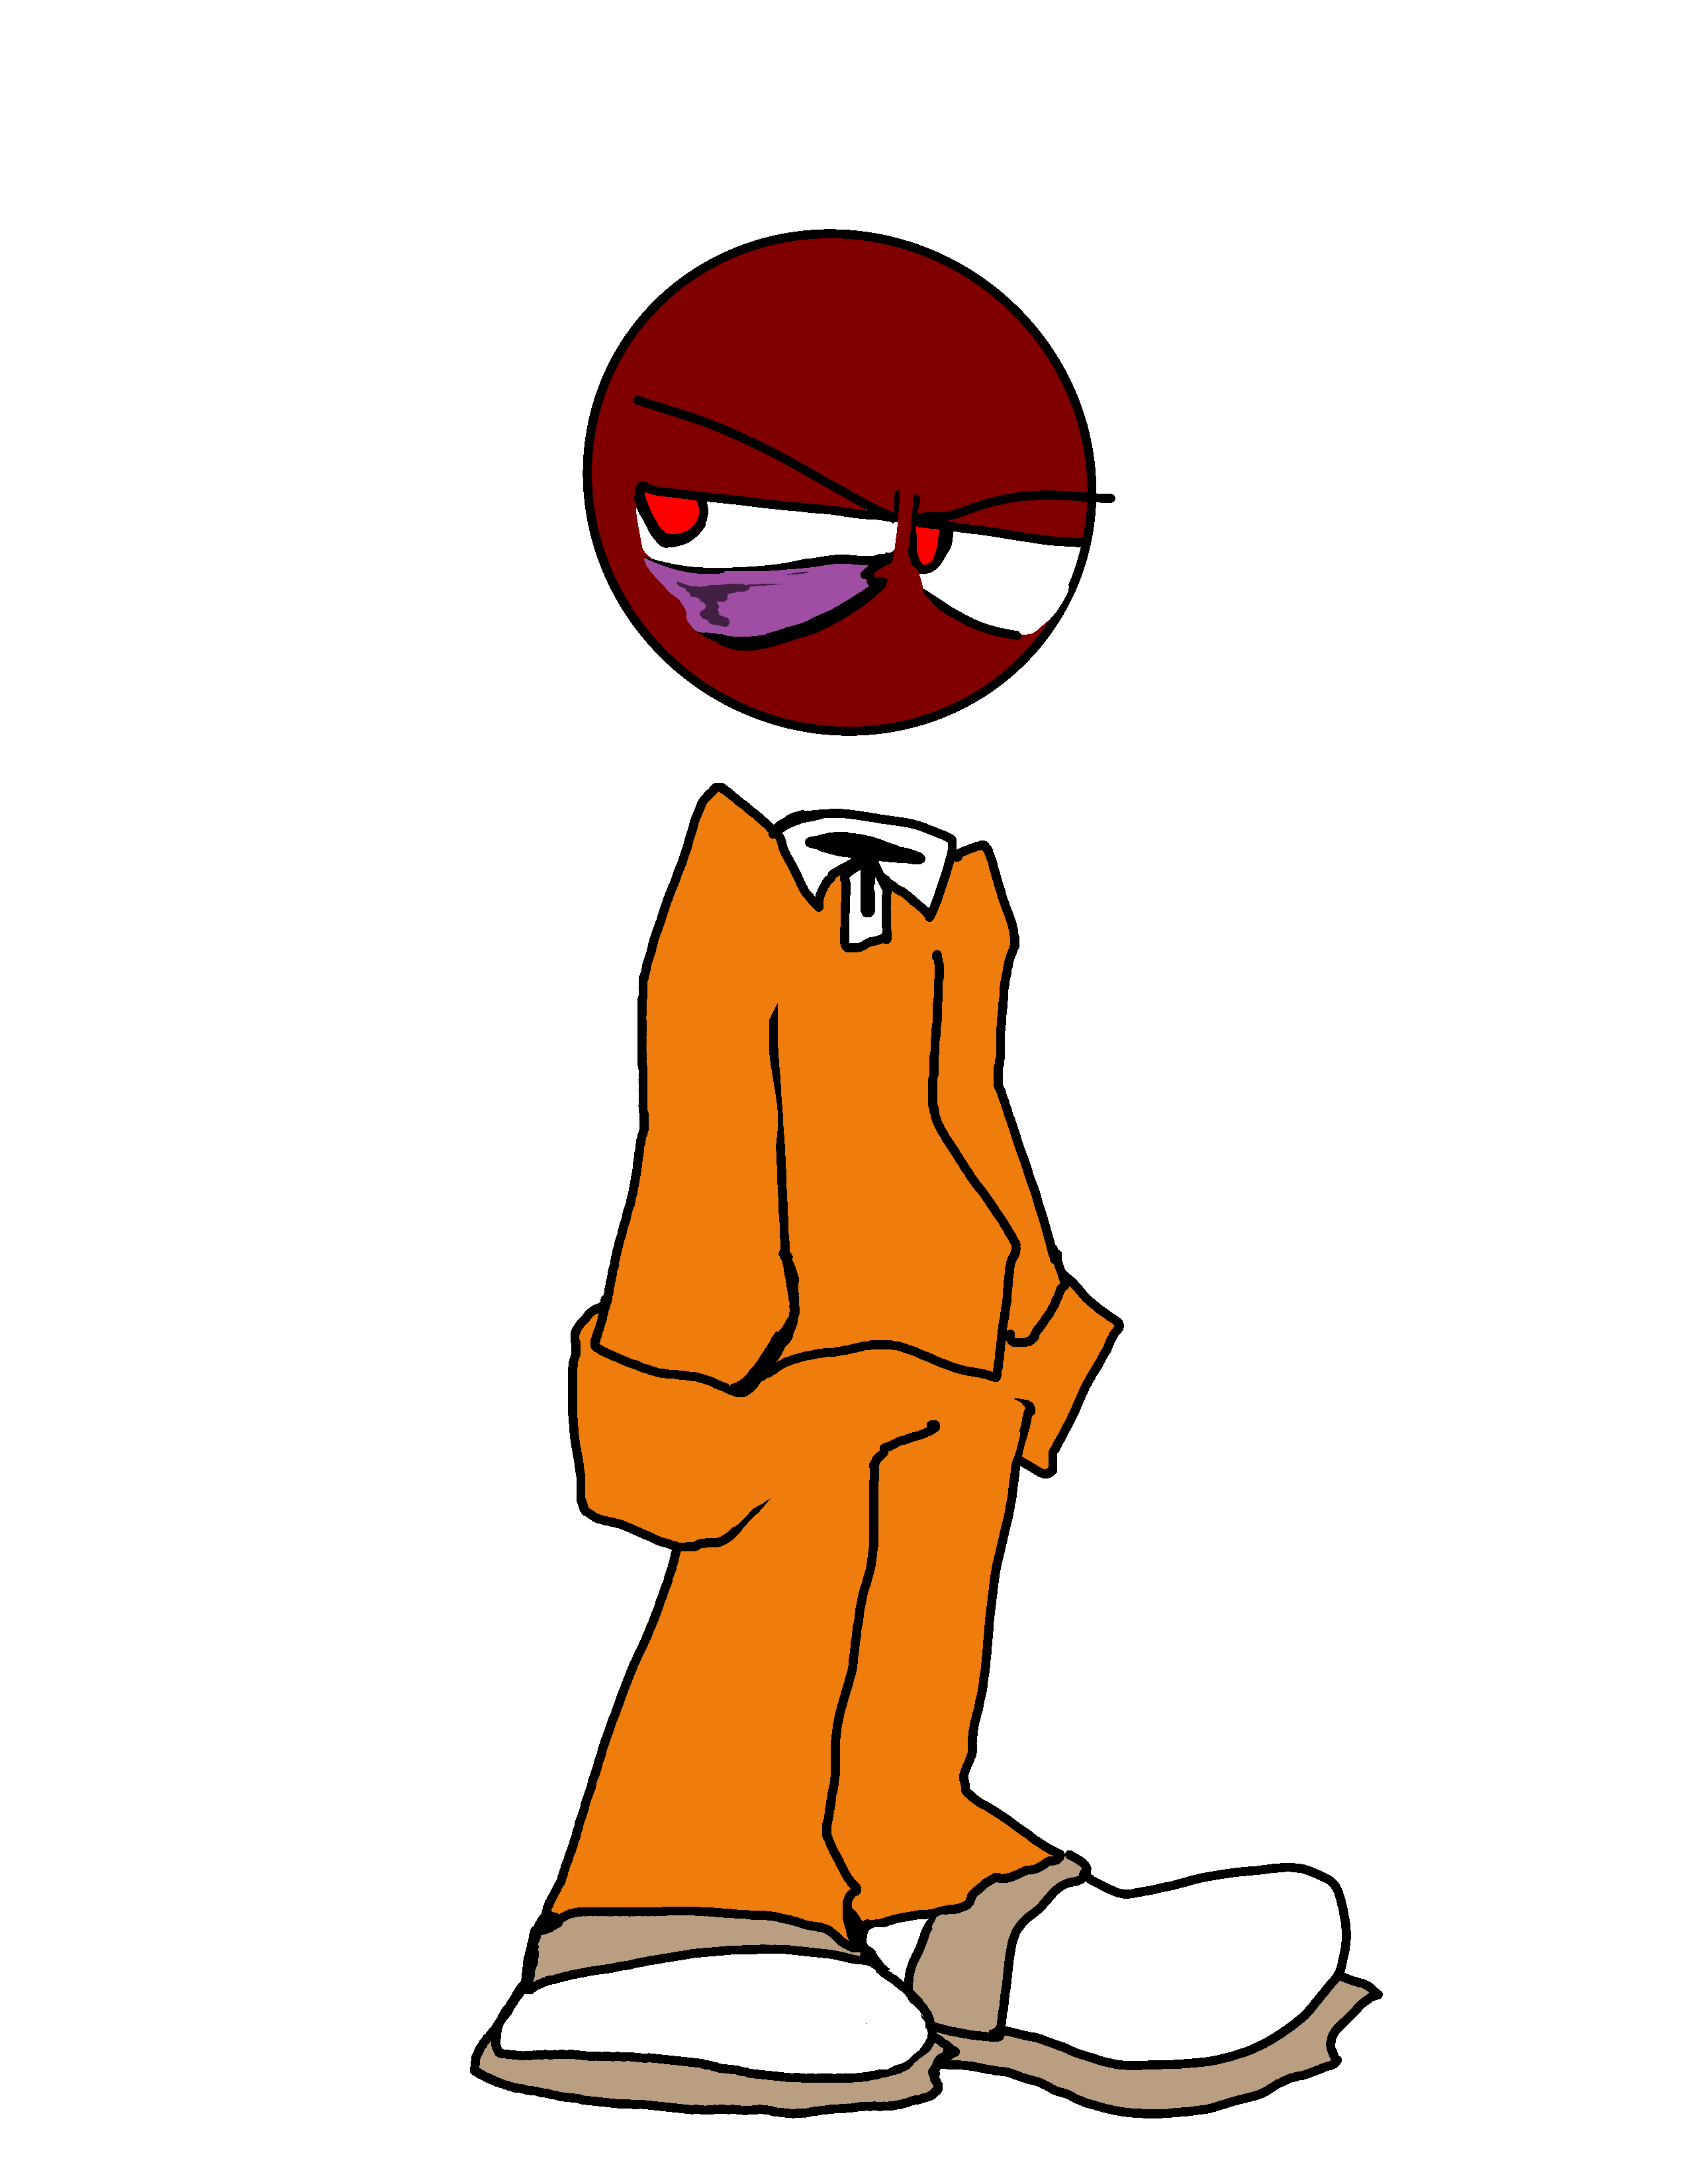 Category:CountryHumans, Fictional Characters Wiki